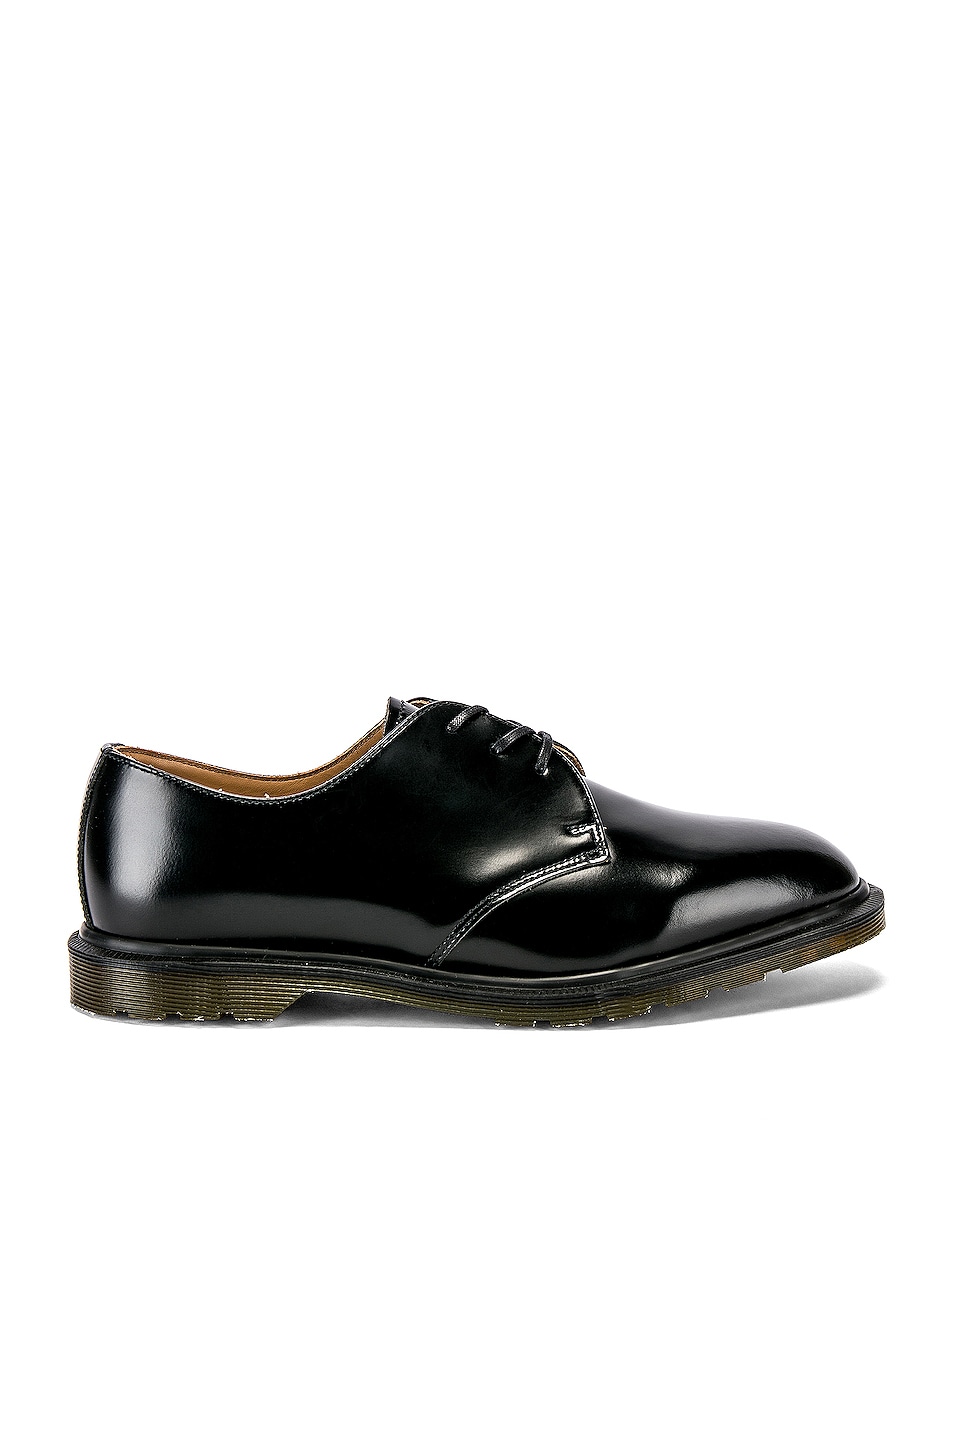 Image 1 of Dr. Martens Made in England Archie Classic Shoe in Black